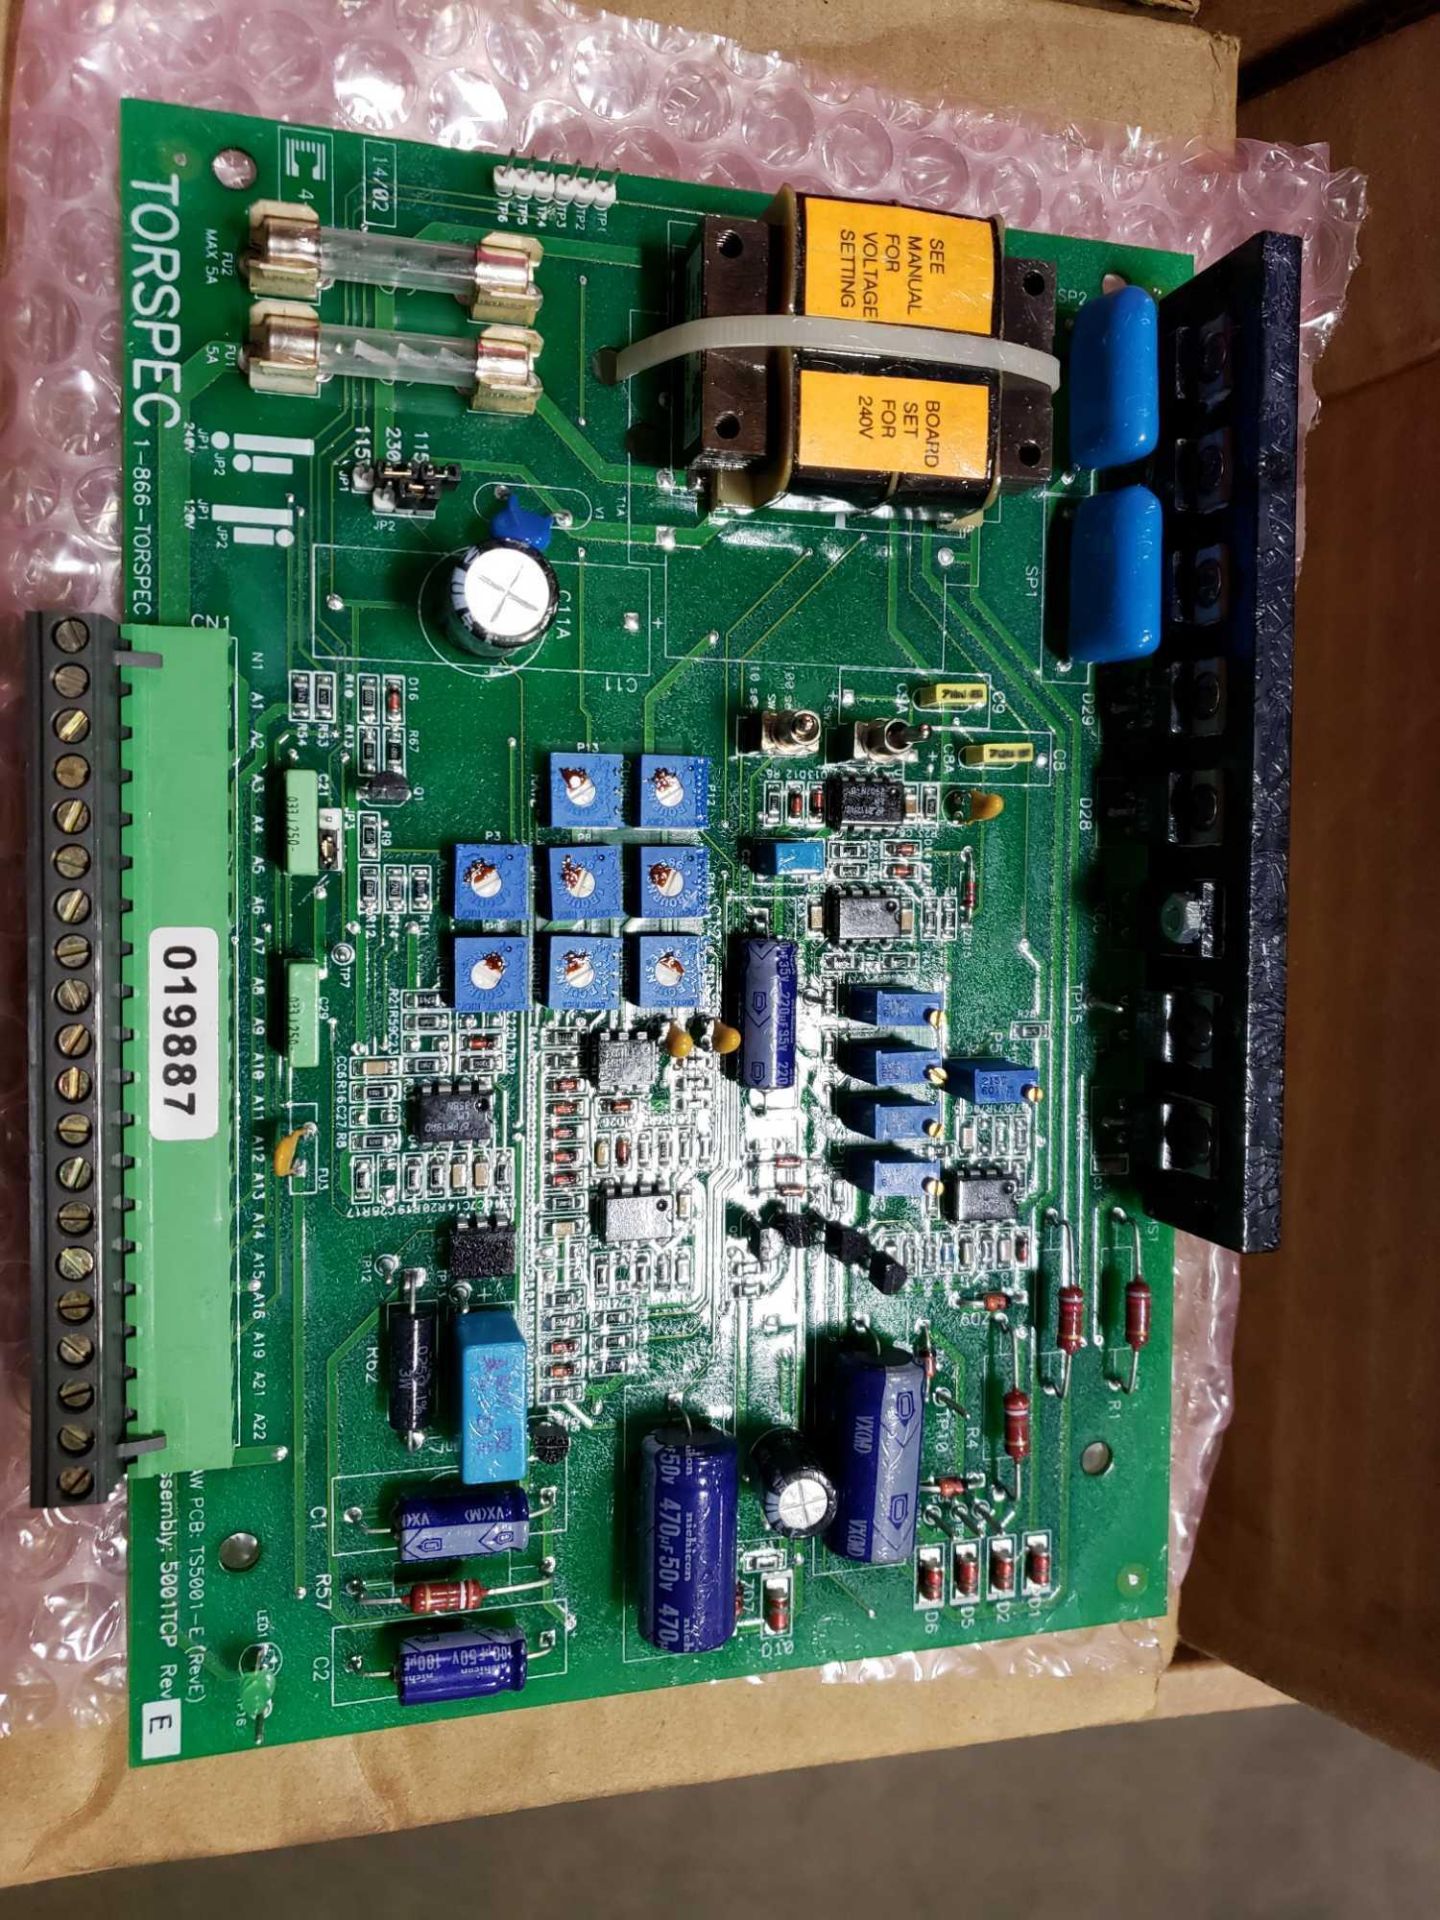 Qty 2 - Torspec control board model 5001TCP. New in box. - Image 2 of 3